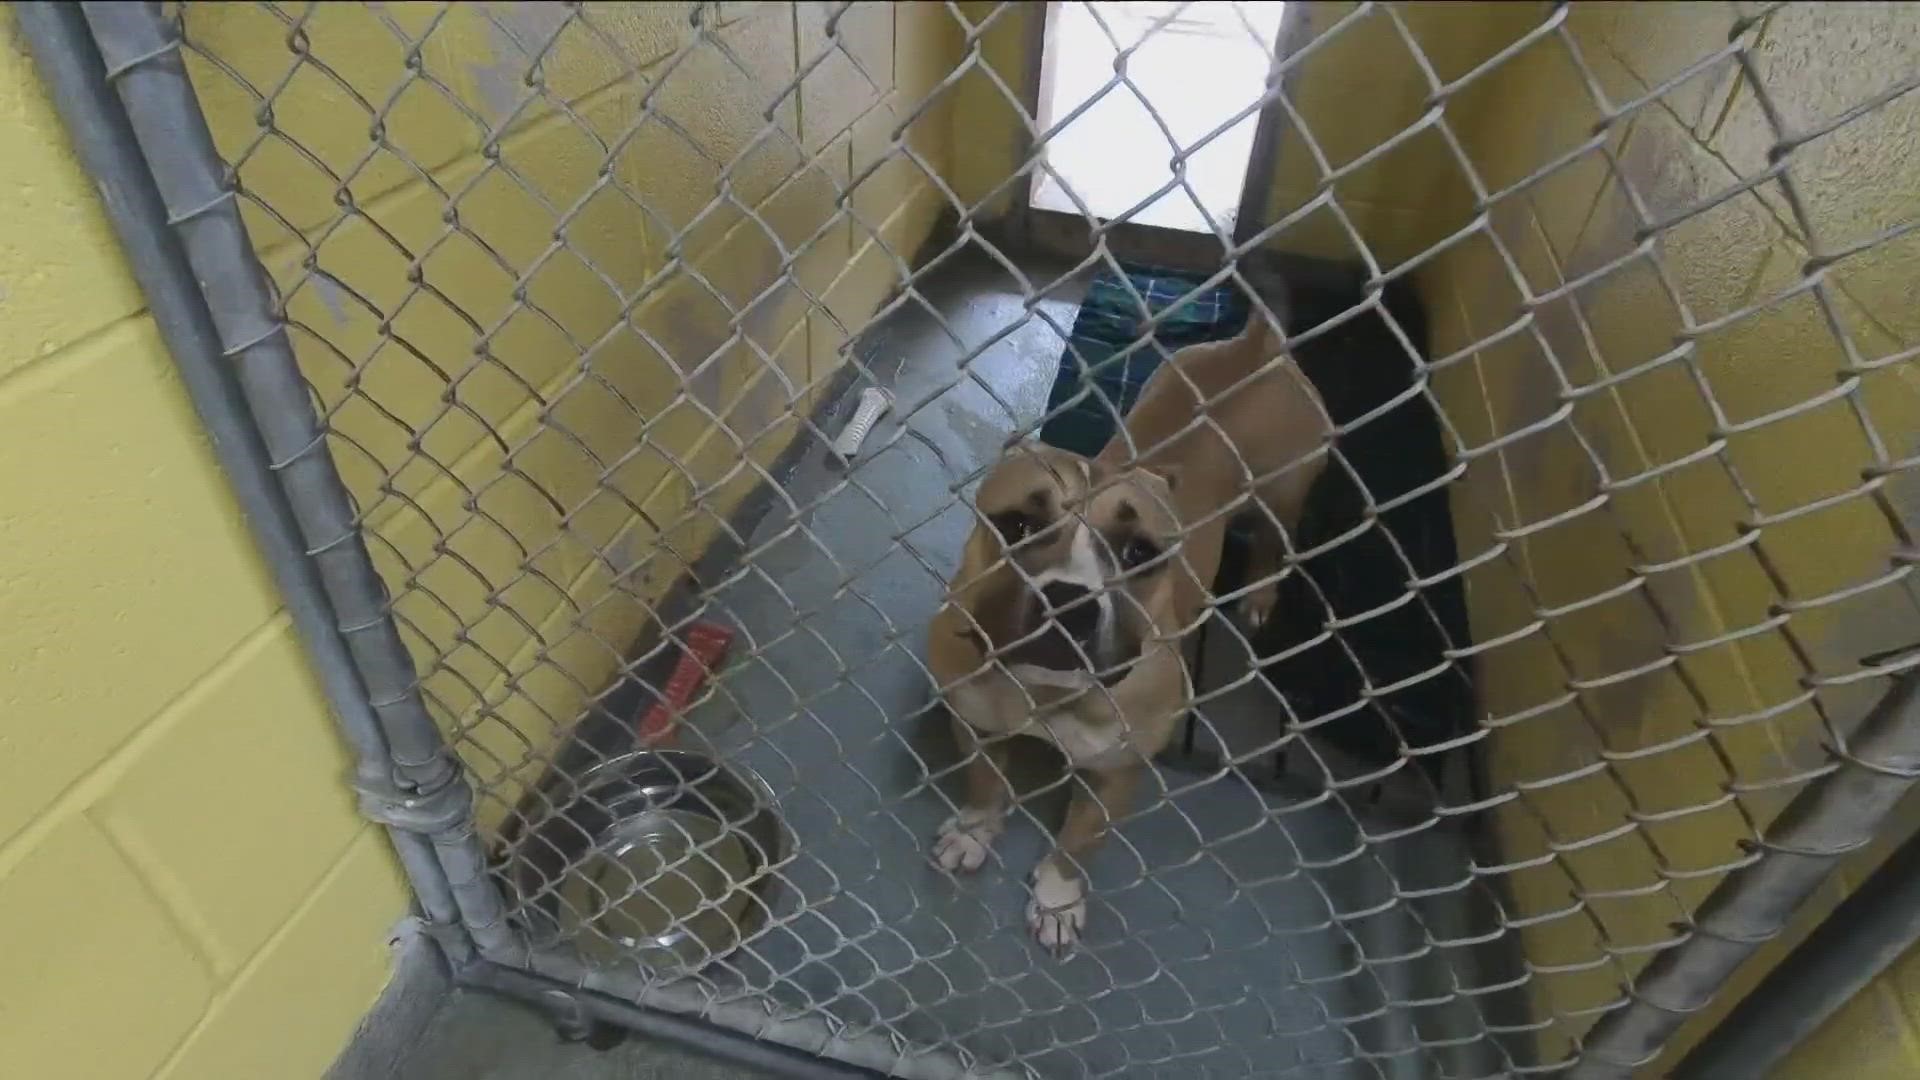 Niagara SPCA is looking for people to foster dogs and they also need dog food